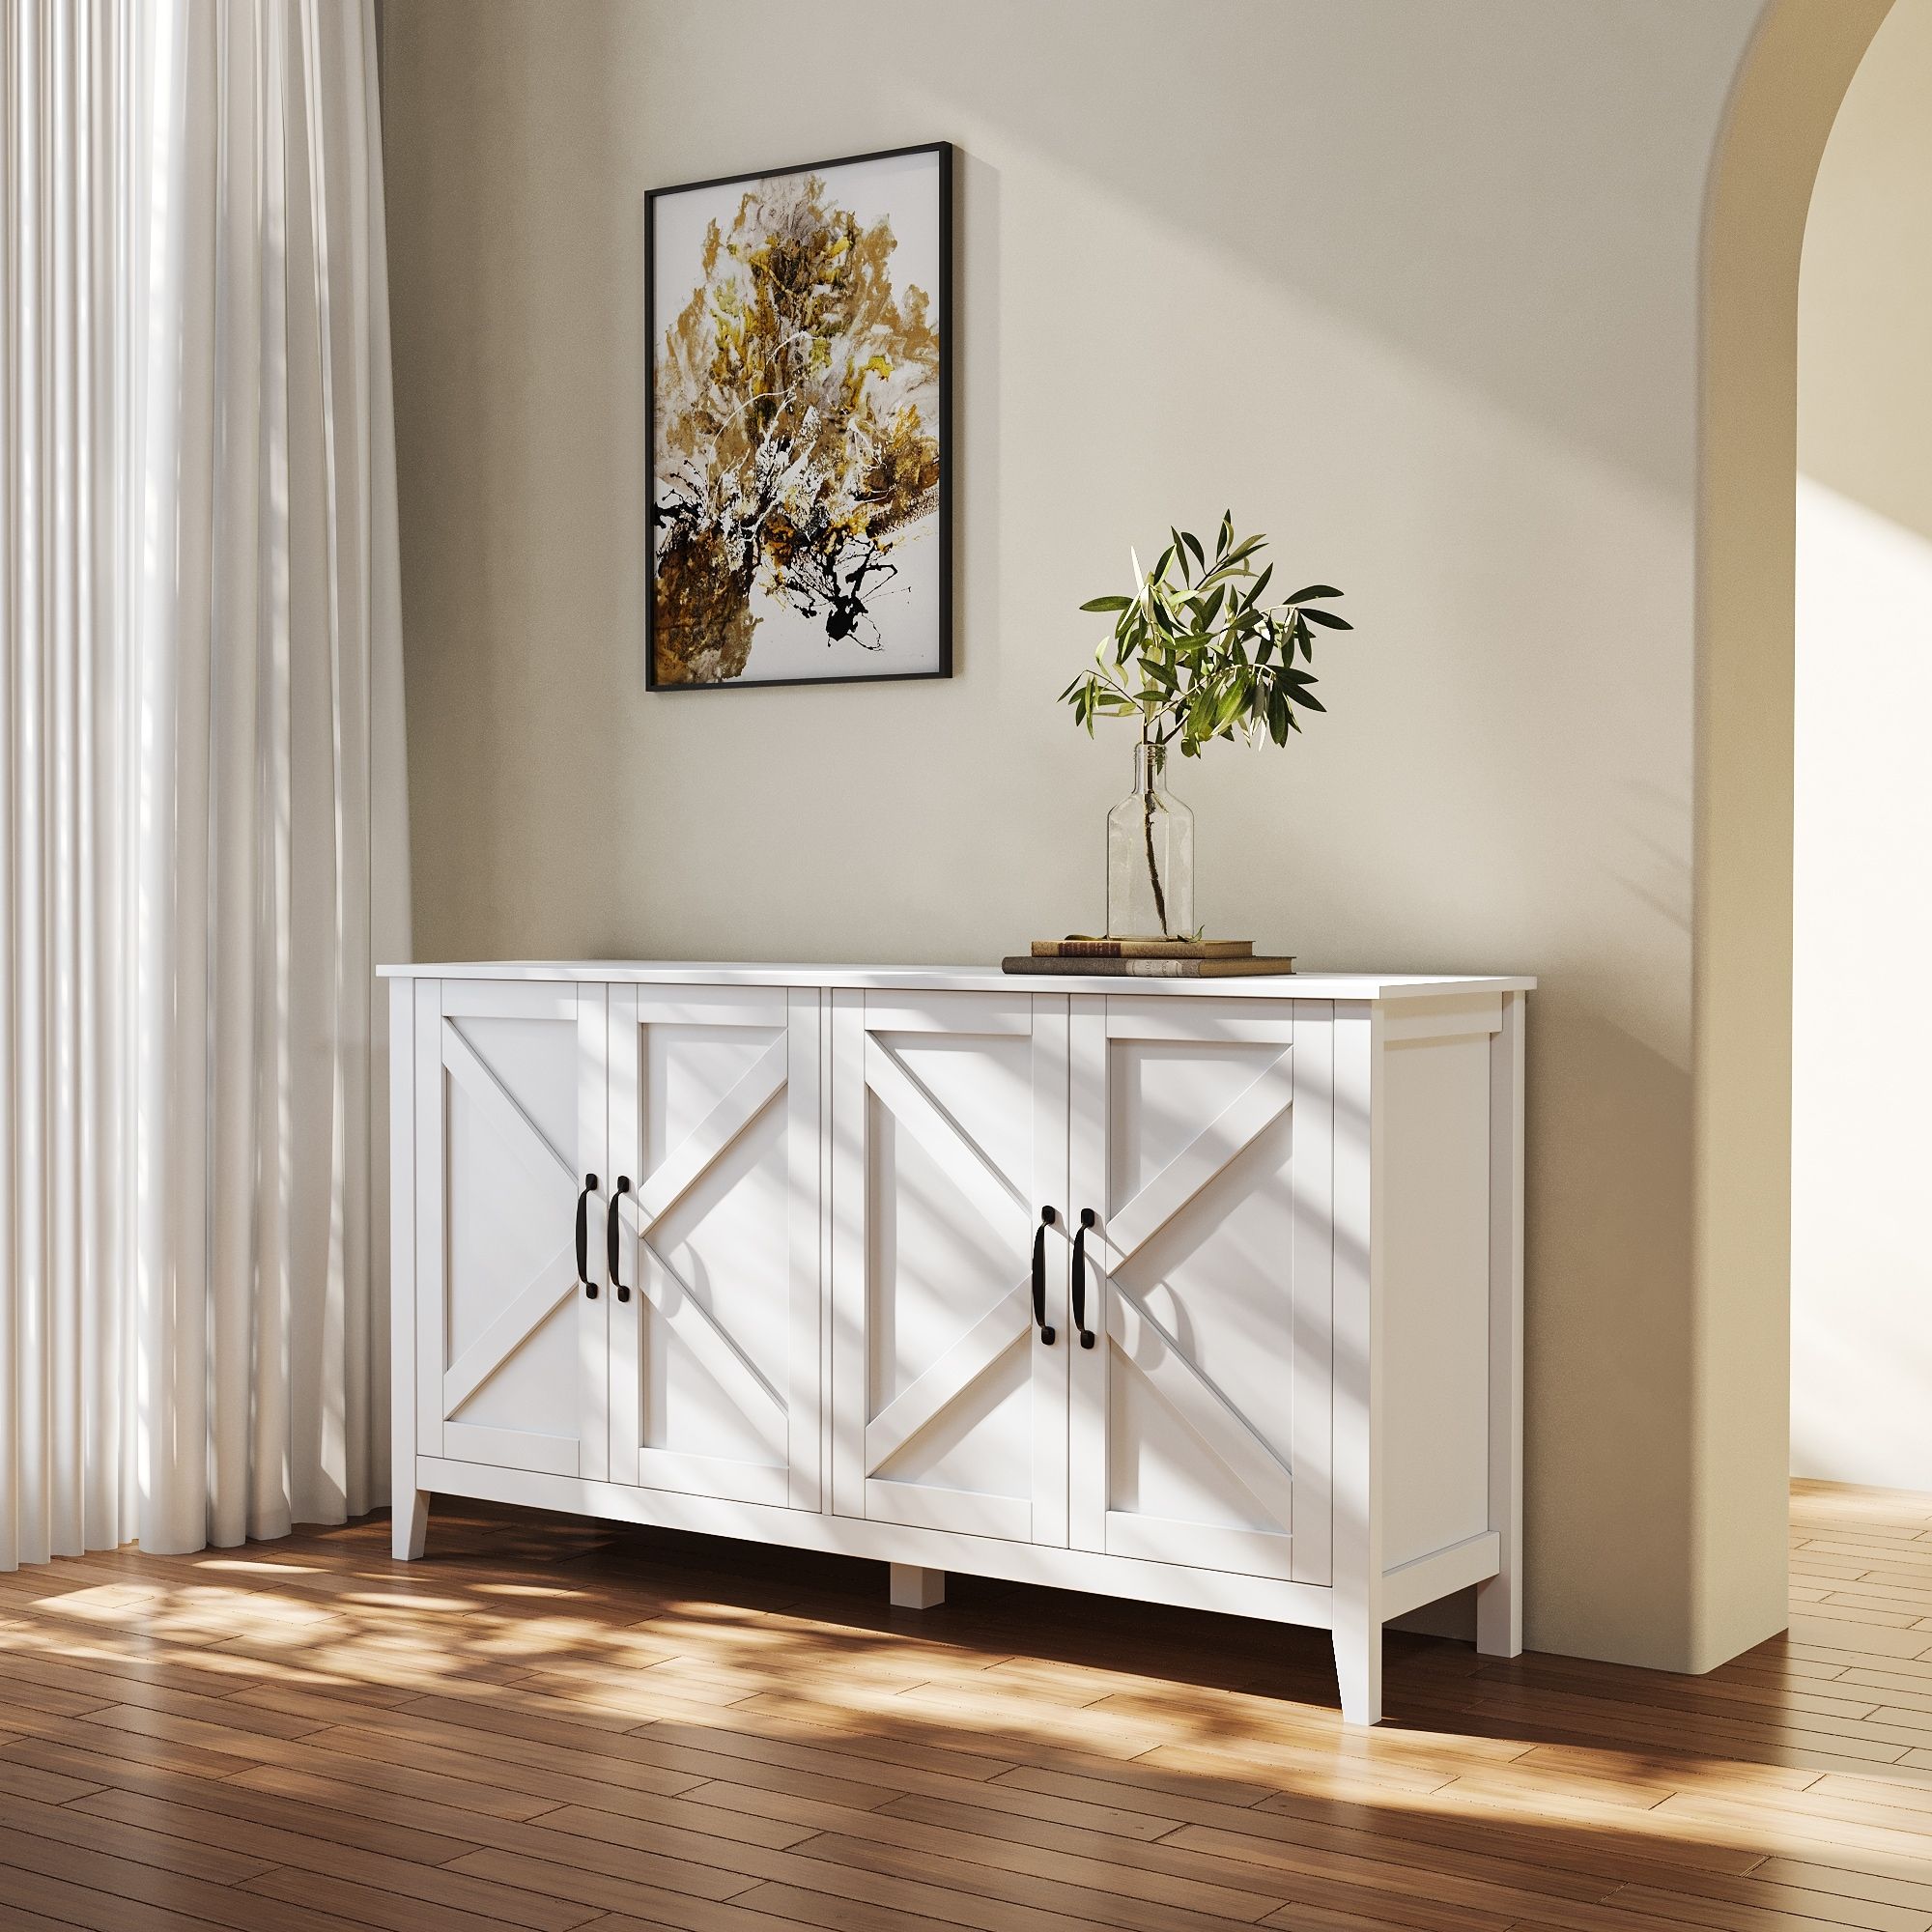 Sideboard Storage Entryway Floor Cabinet With 4 Shelves – Bed Bath & Beyond  – 37068169 Within Sideboards For Entryway (Photo 7 of 15)